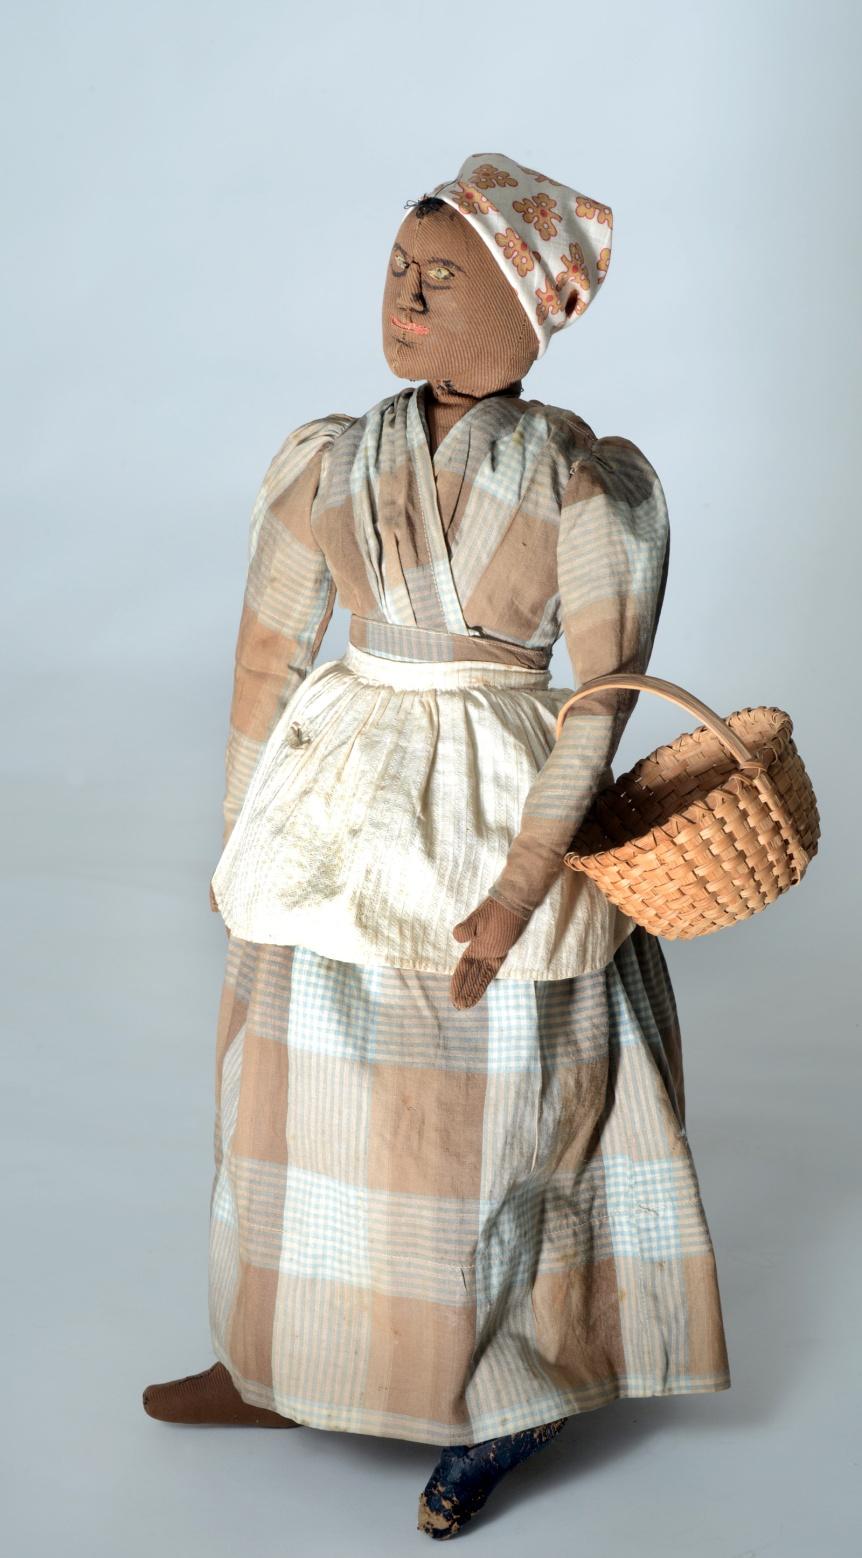 American folk dolls are captivating. They make us smile.